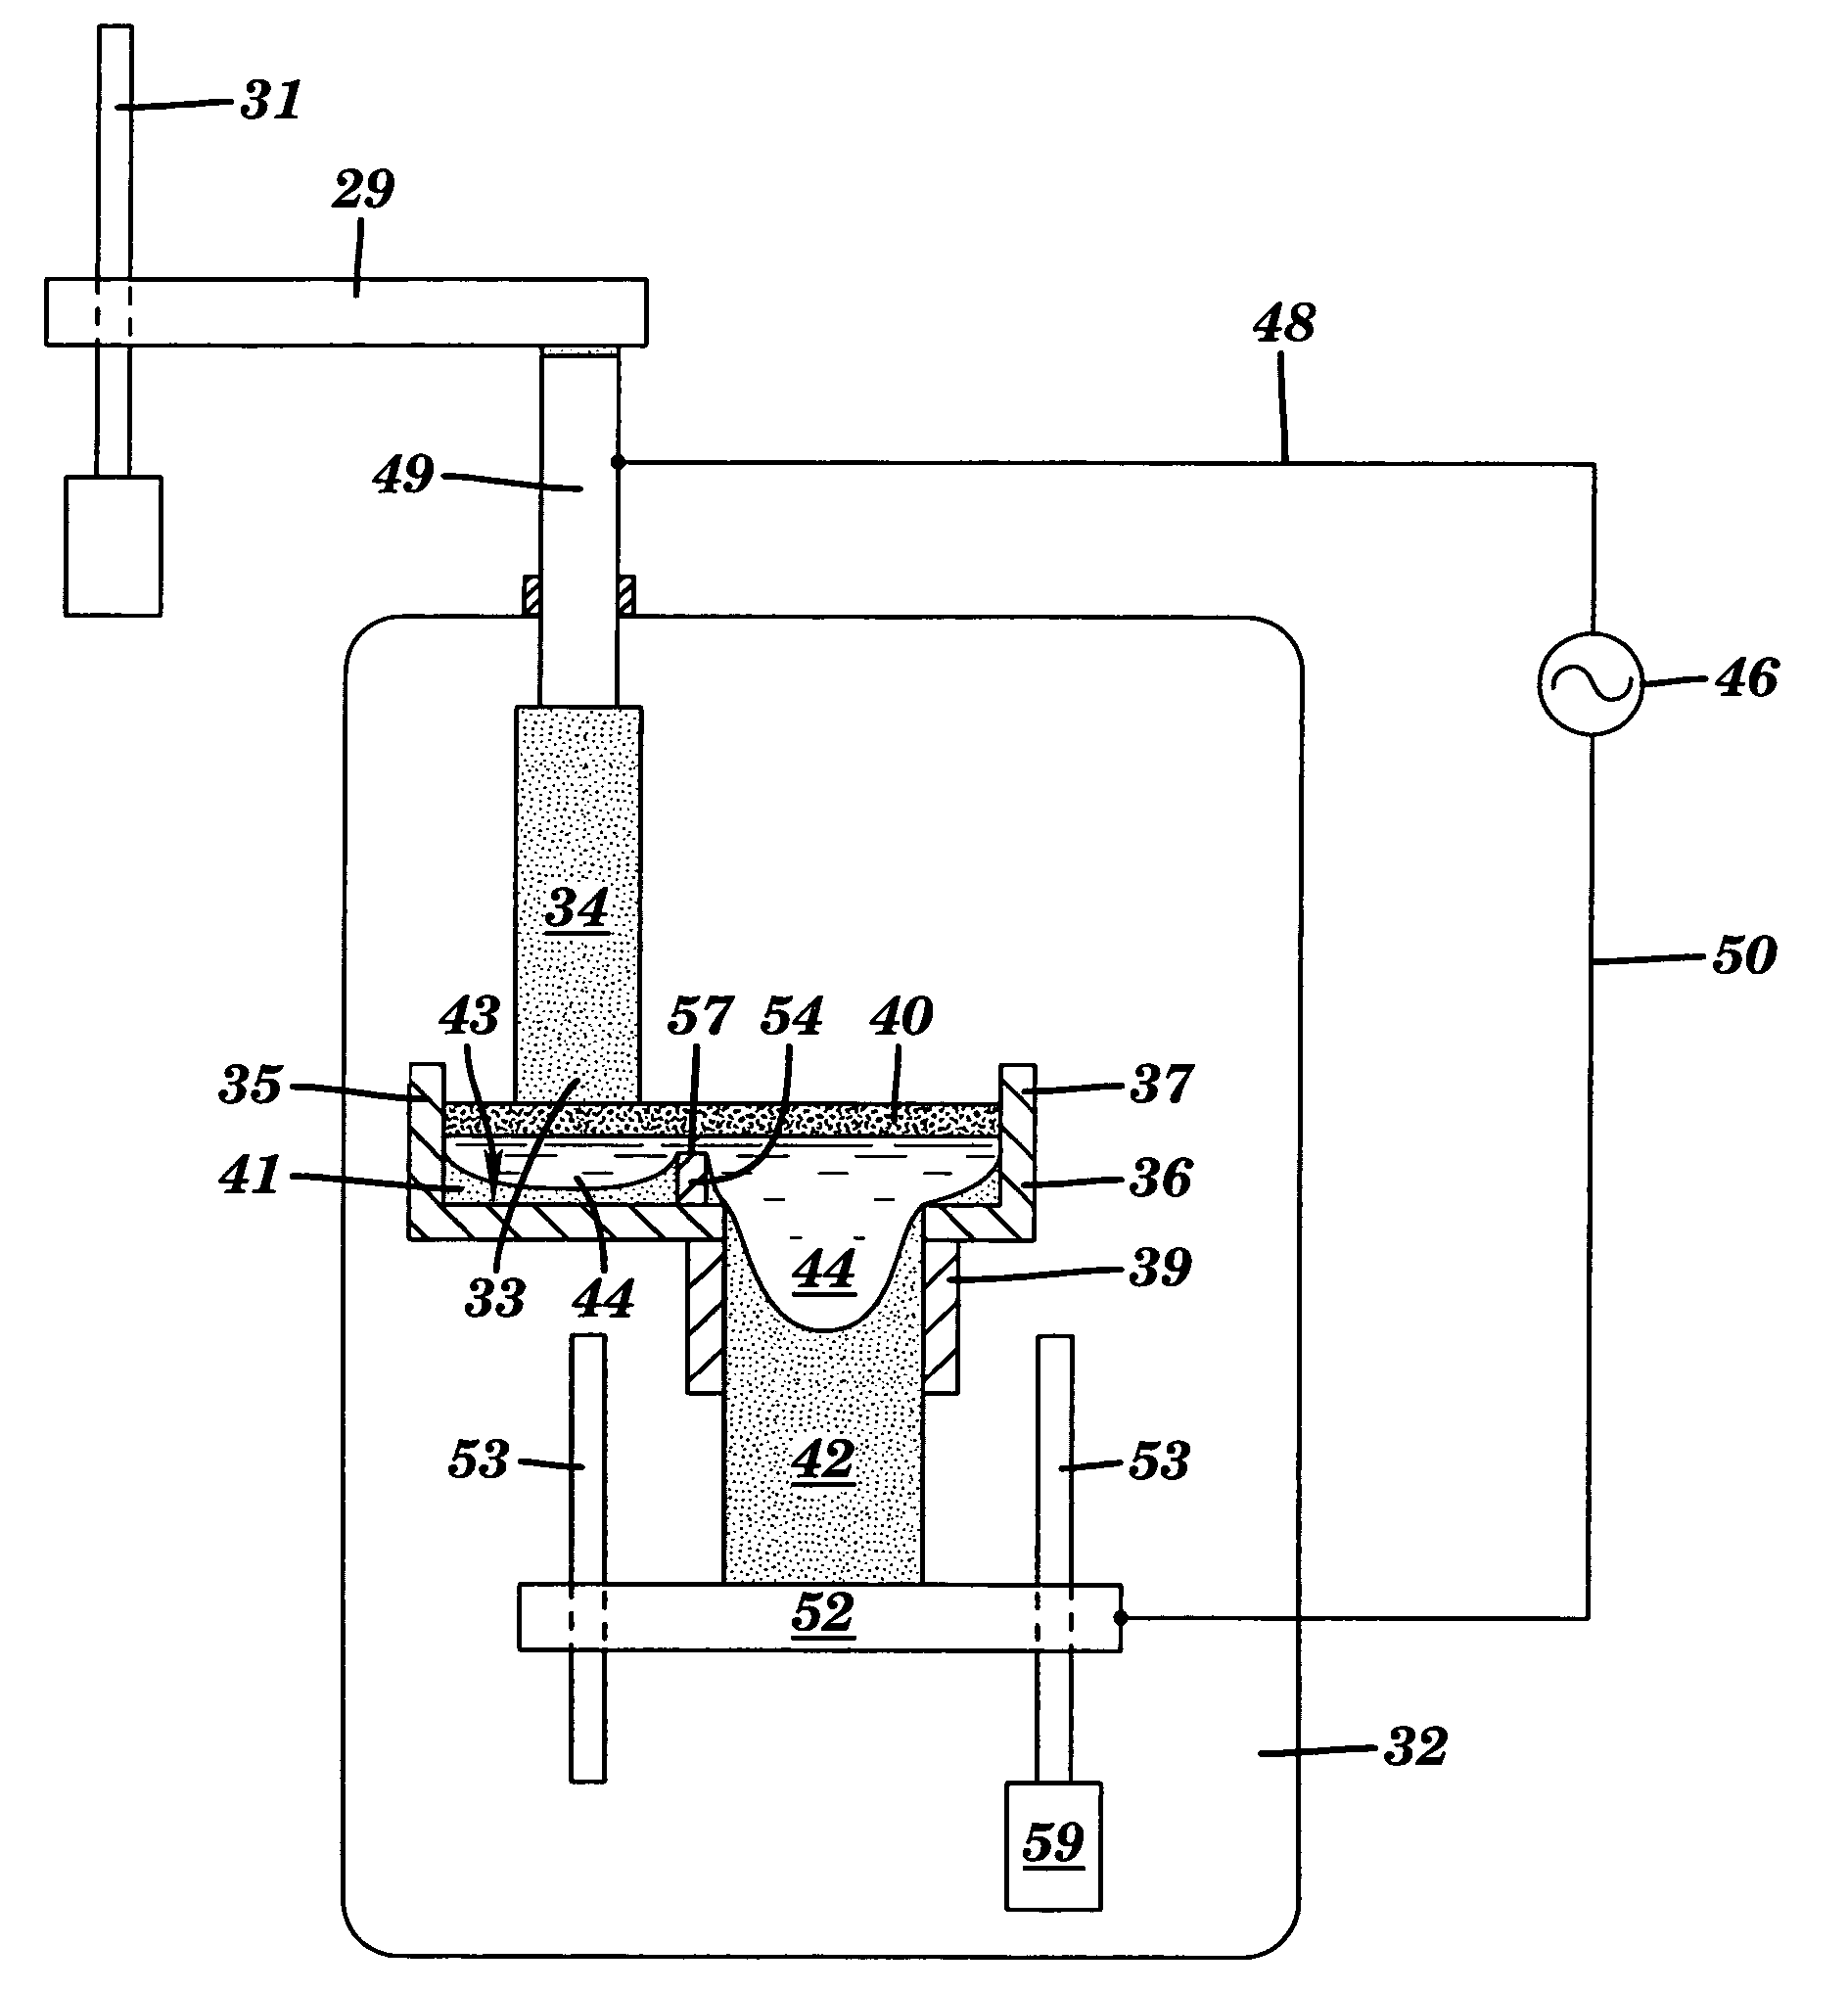 Apparatus for the production or refining of metals, and related processes